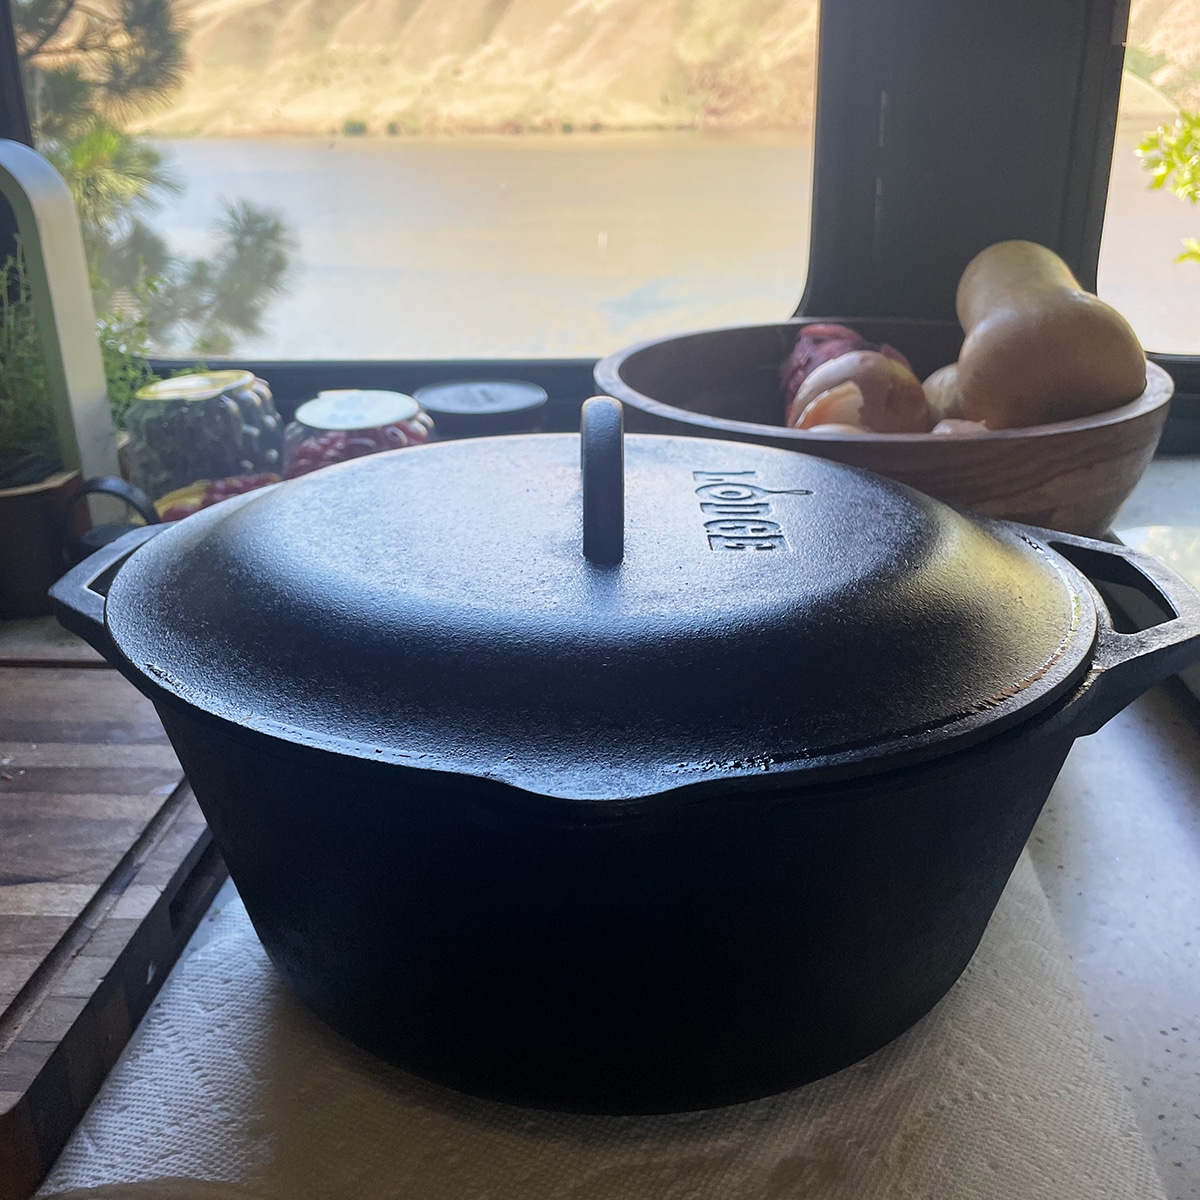 A cast iron Dutch oven resting on pieces of tofu to squeeze excess water from the tofu,